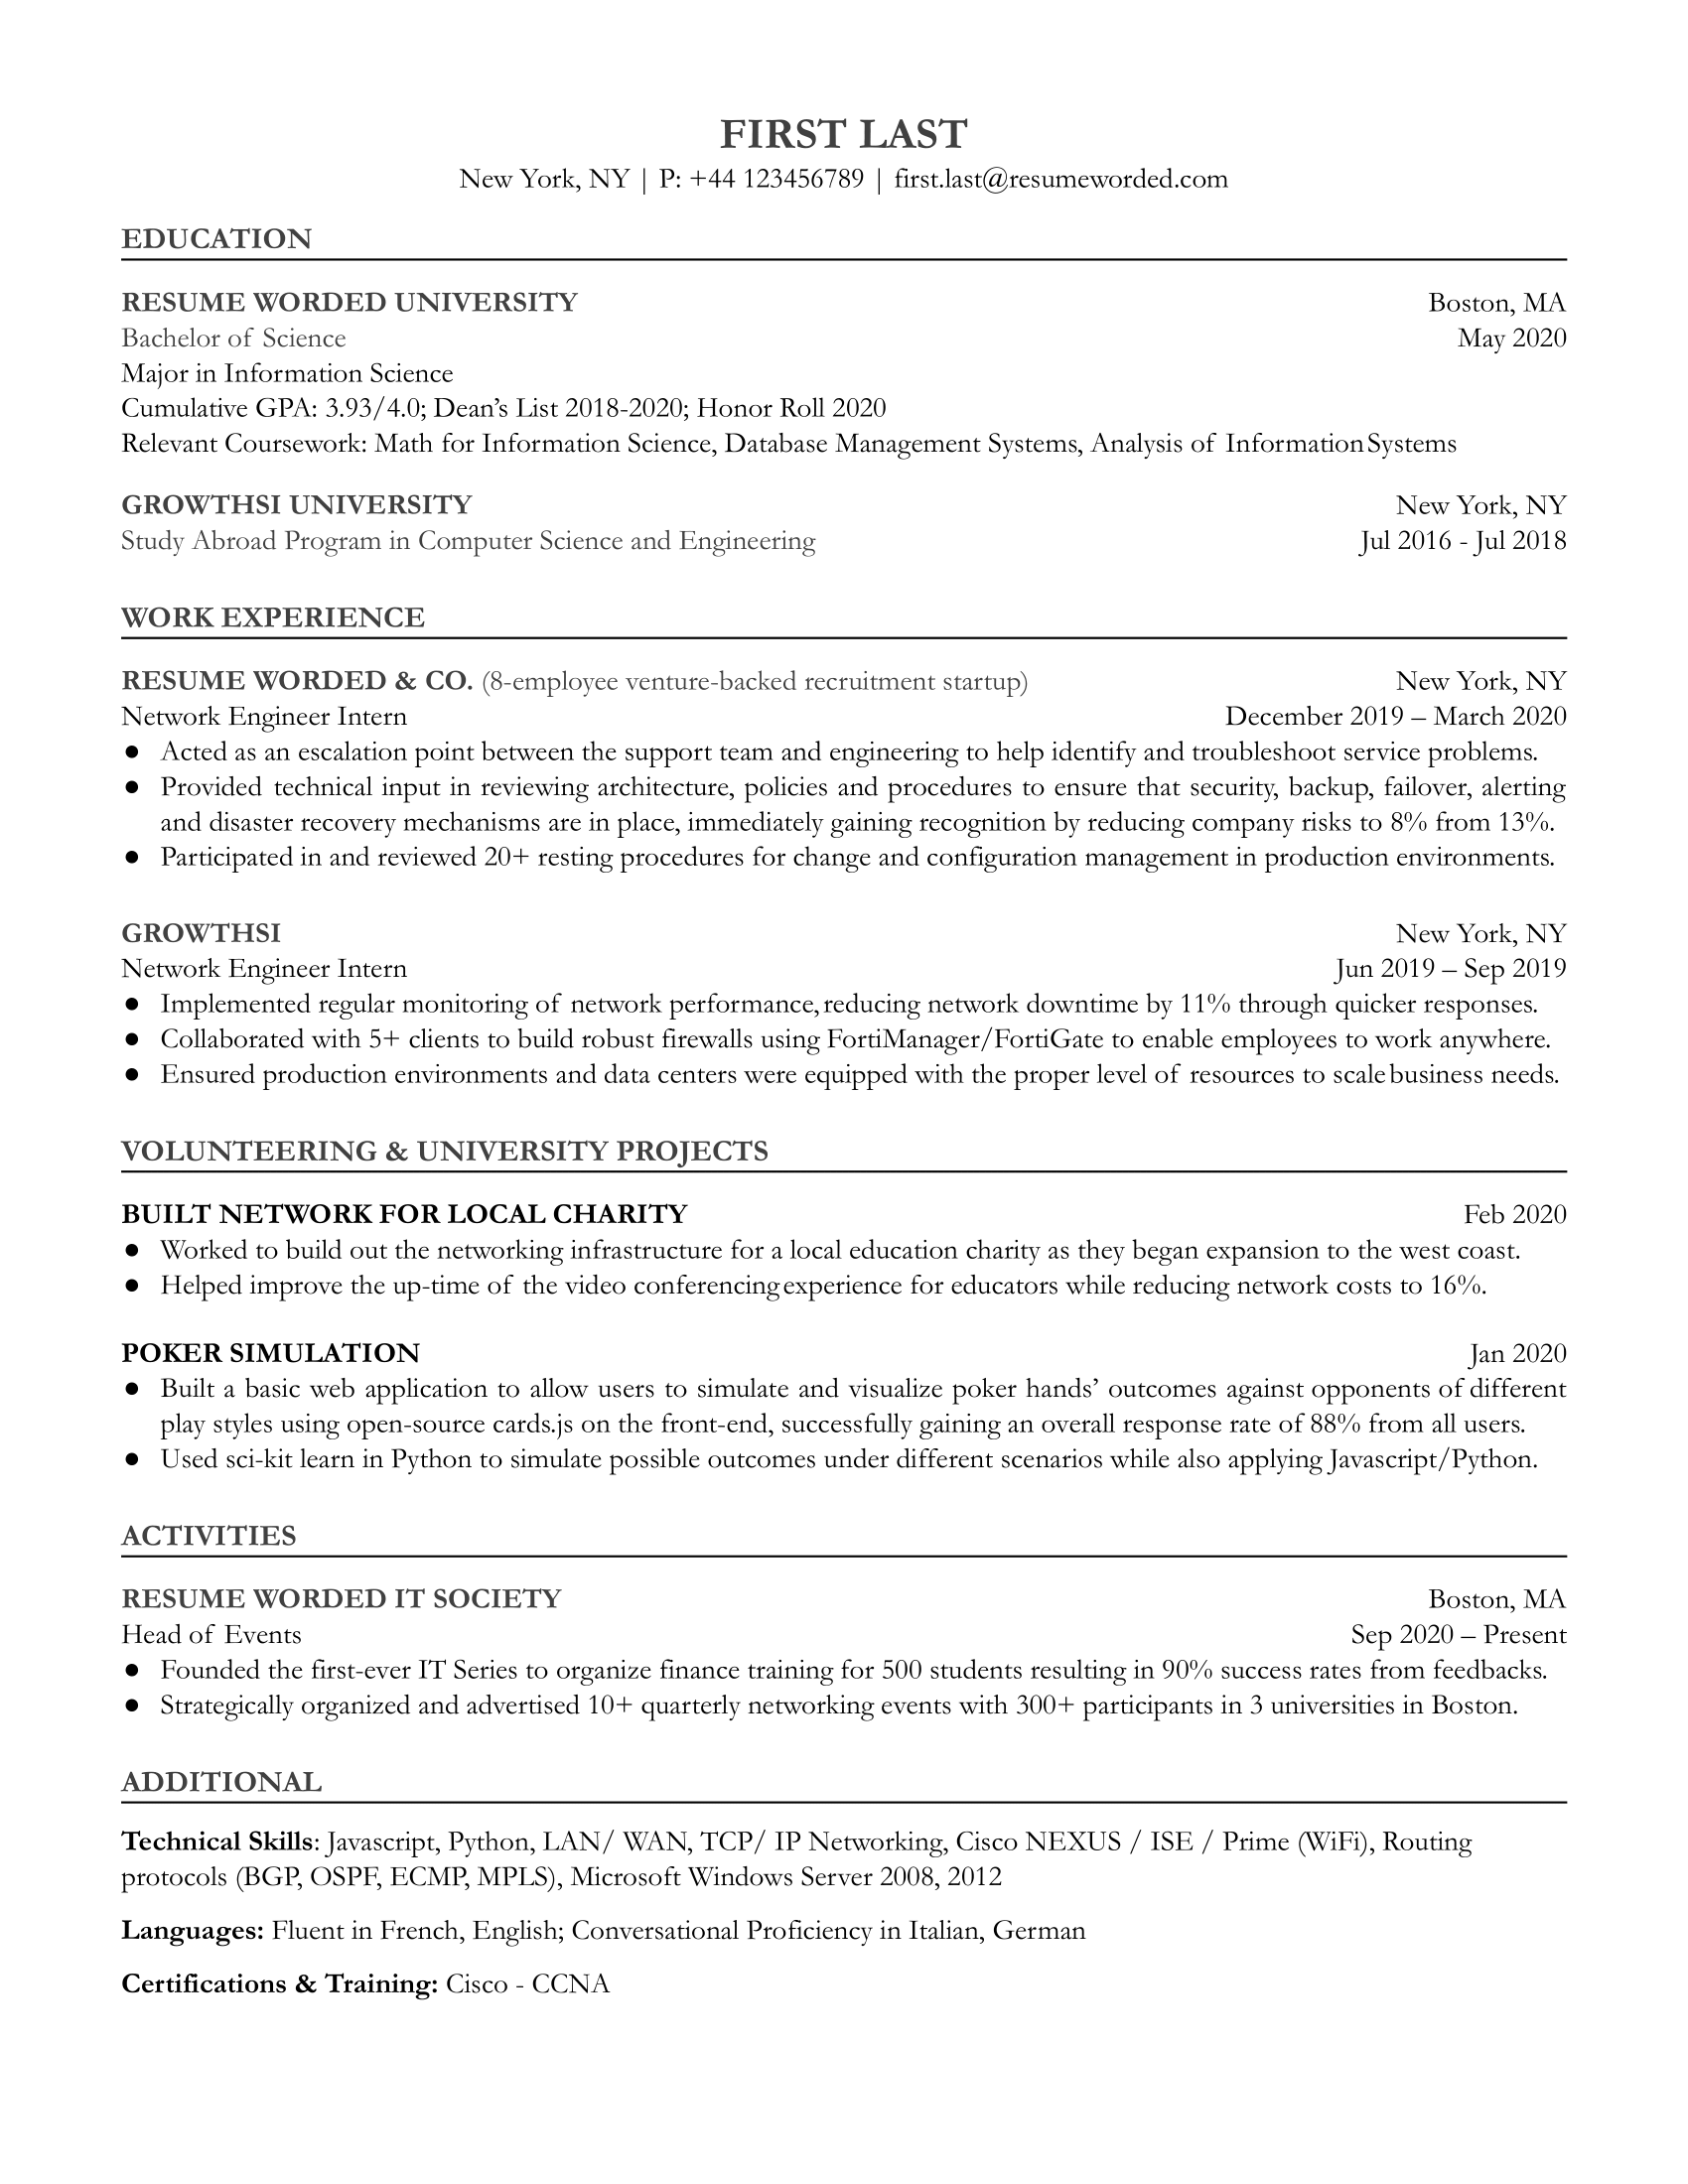 Entry-level network engineer resume with relevant education, internship experience, and skills section
